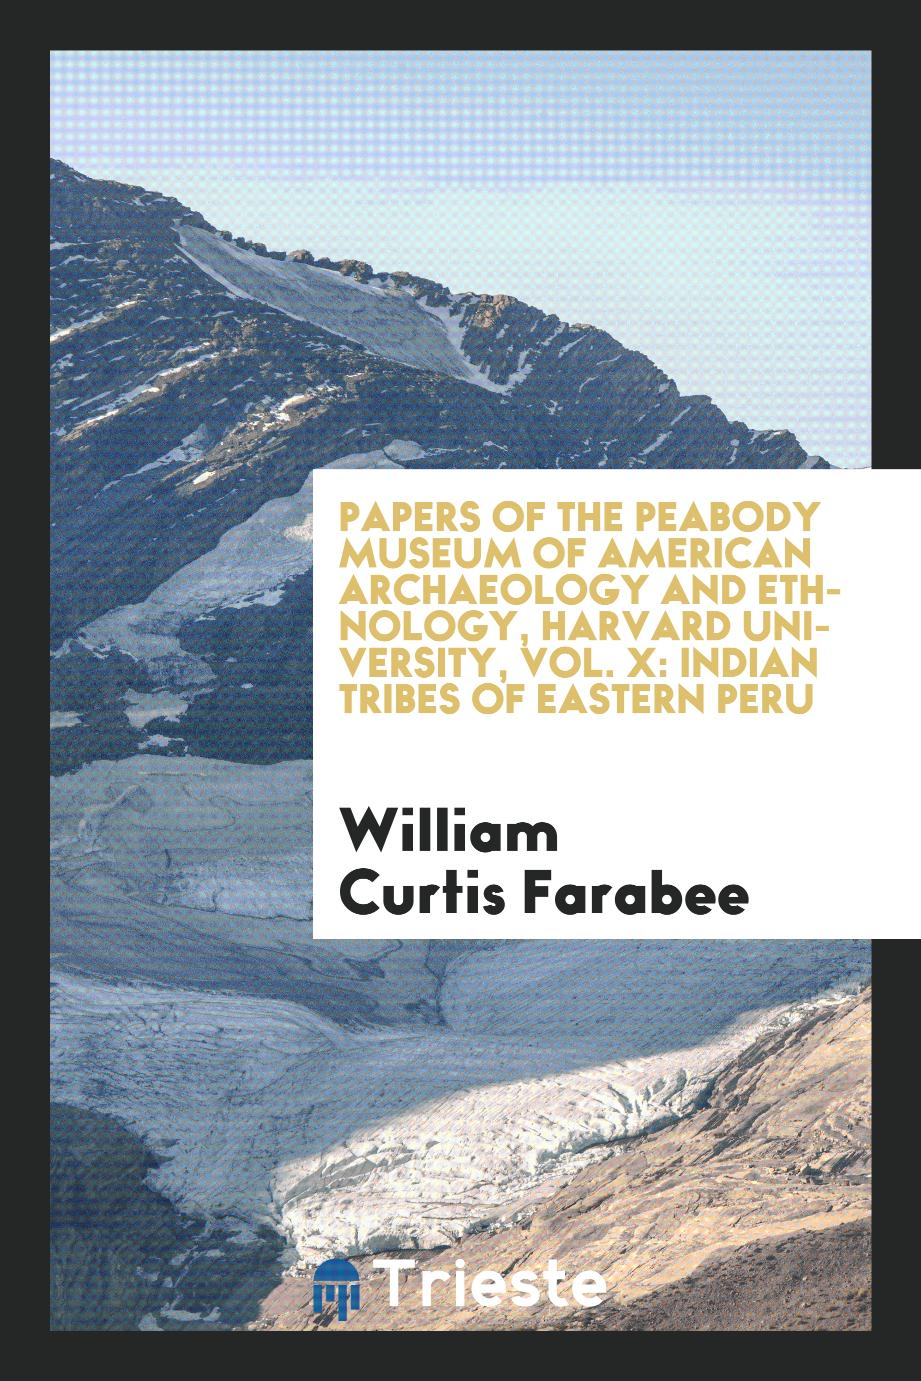 Papers of the peabody museum of American archaeology and ethnology, Harvard University, Vol. X: Indian tribes of eastern Peru